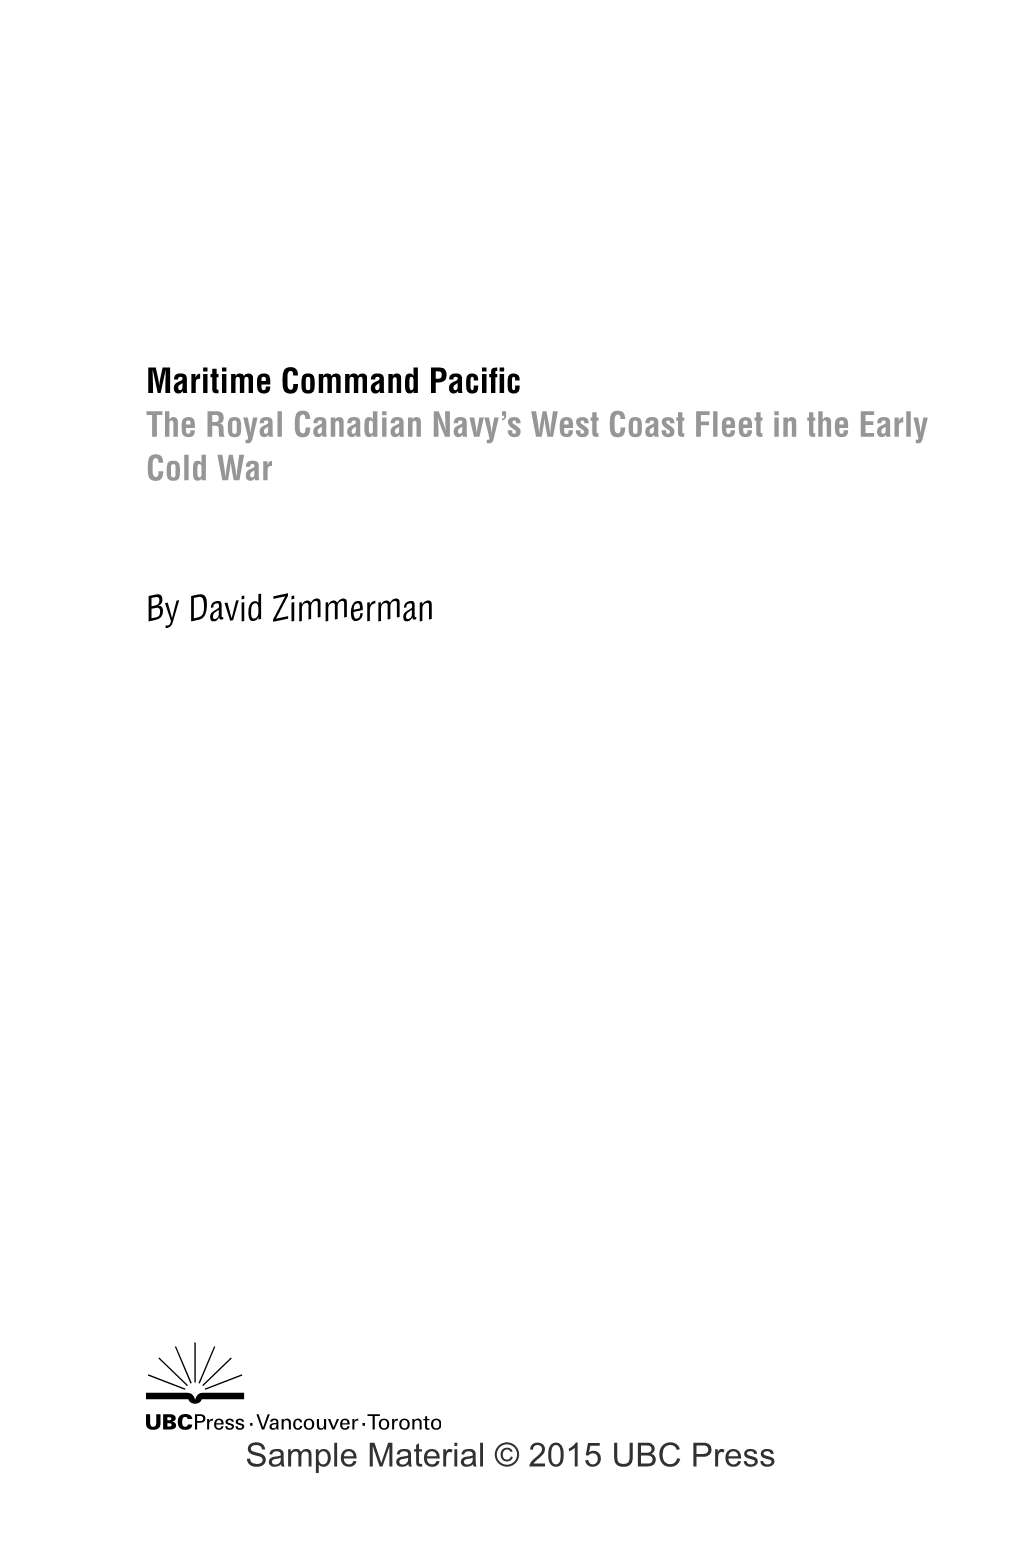 Maritime Command Pacific the Royal Canadian Navy's West Coast Fleet